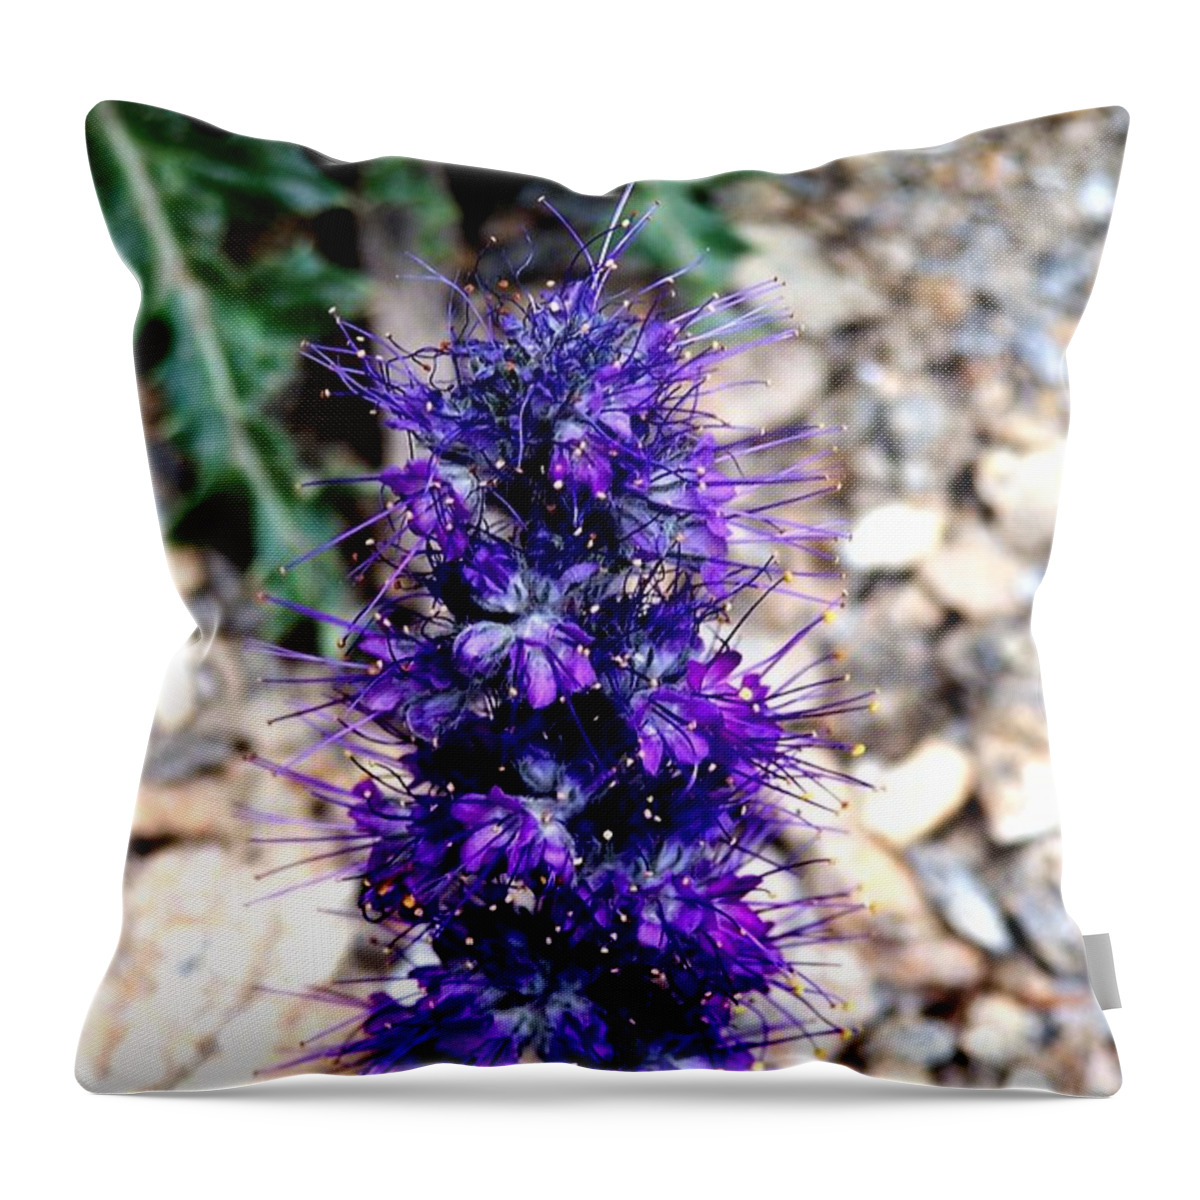 Wildflowers Throw Pillow featuring the photograph Purple Reign by Dorrene BrownButterfield